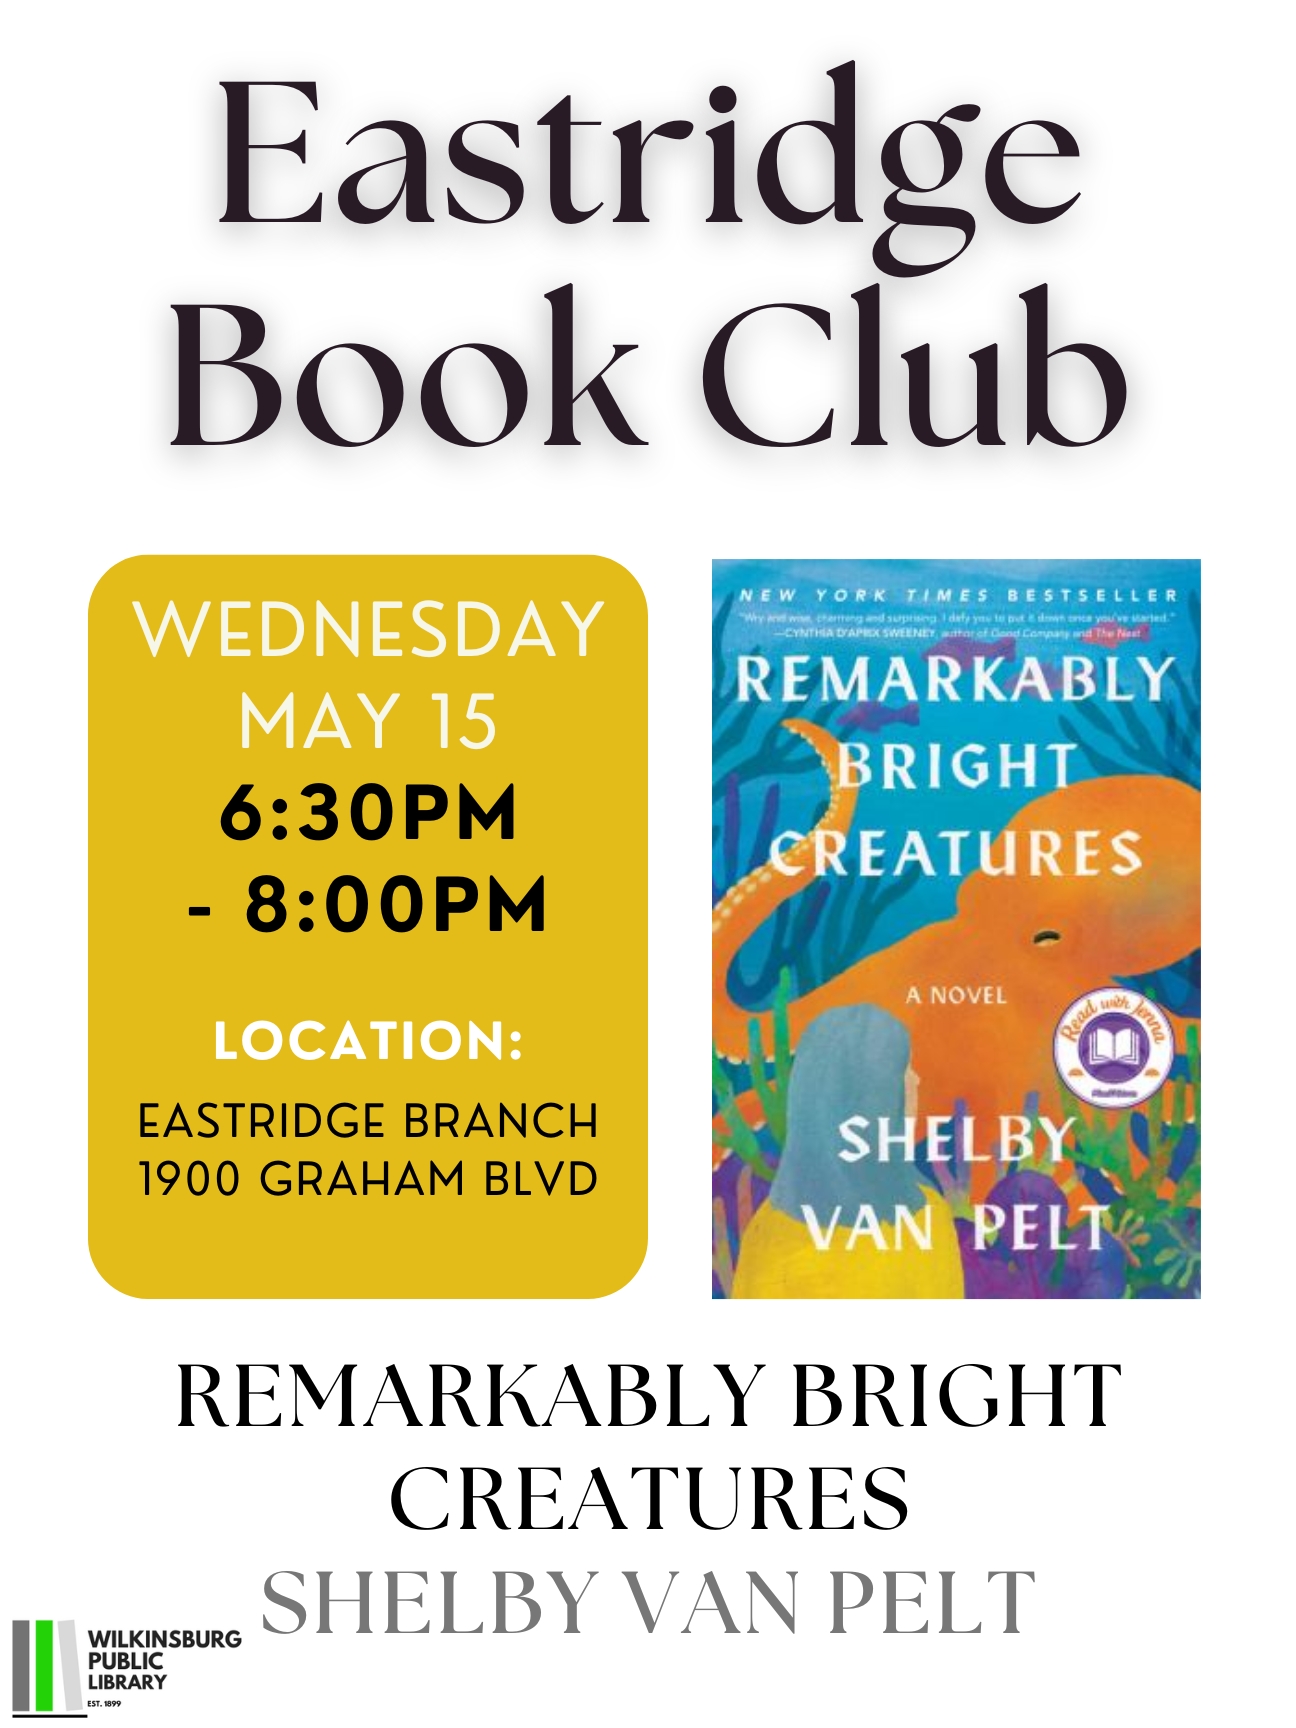 Eastridge Book Club pick is Remarkably Bright Creatures by Shelby Van Pelt. At Eastridge Branch on May 15th at 6:30pm